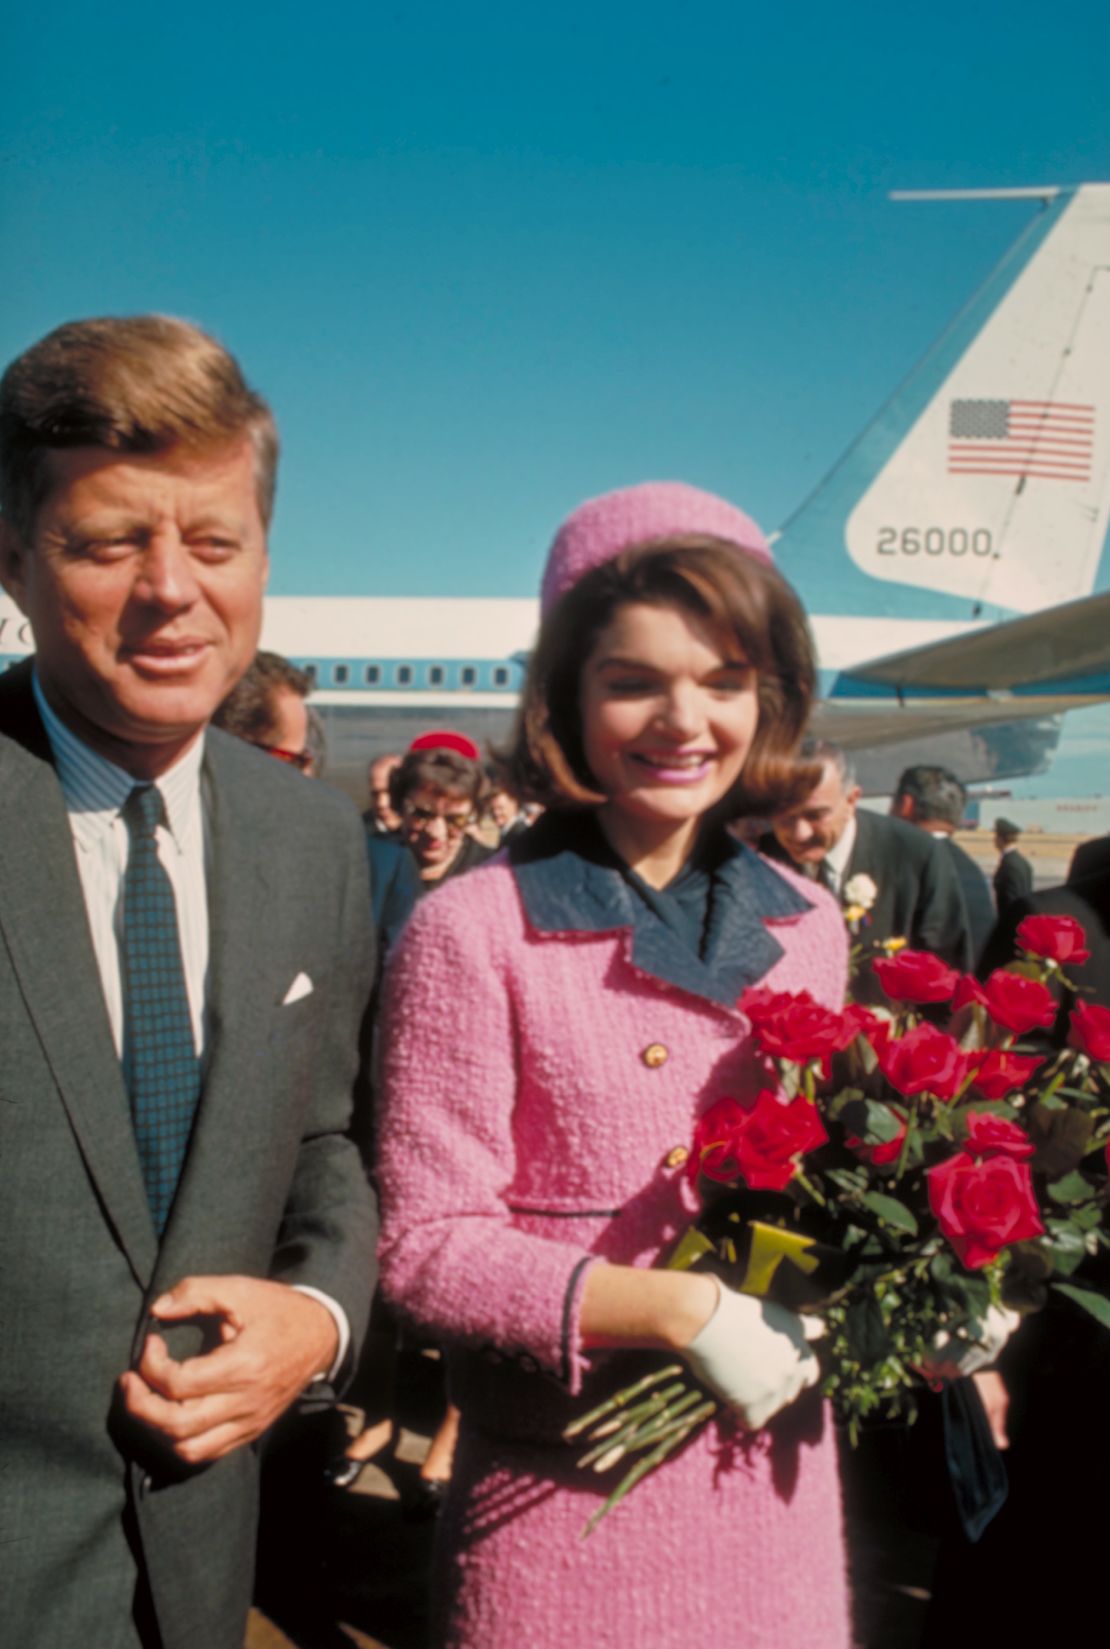 President John F. Kennedy and his wife Jackie on November 22, 1963,  just after their arrival at the airport for the fateful drive through Dallas.